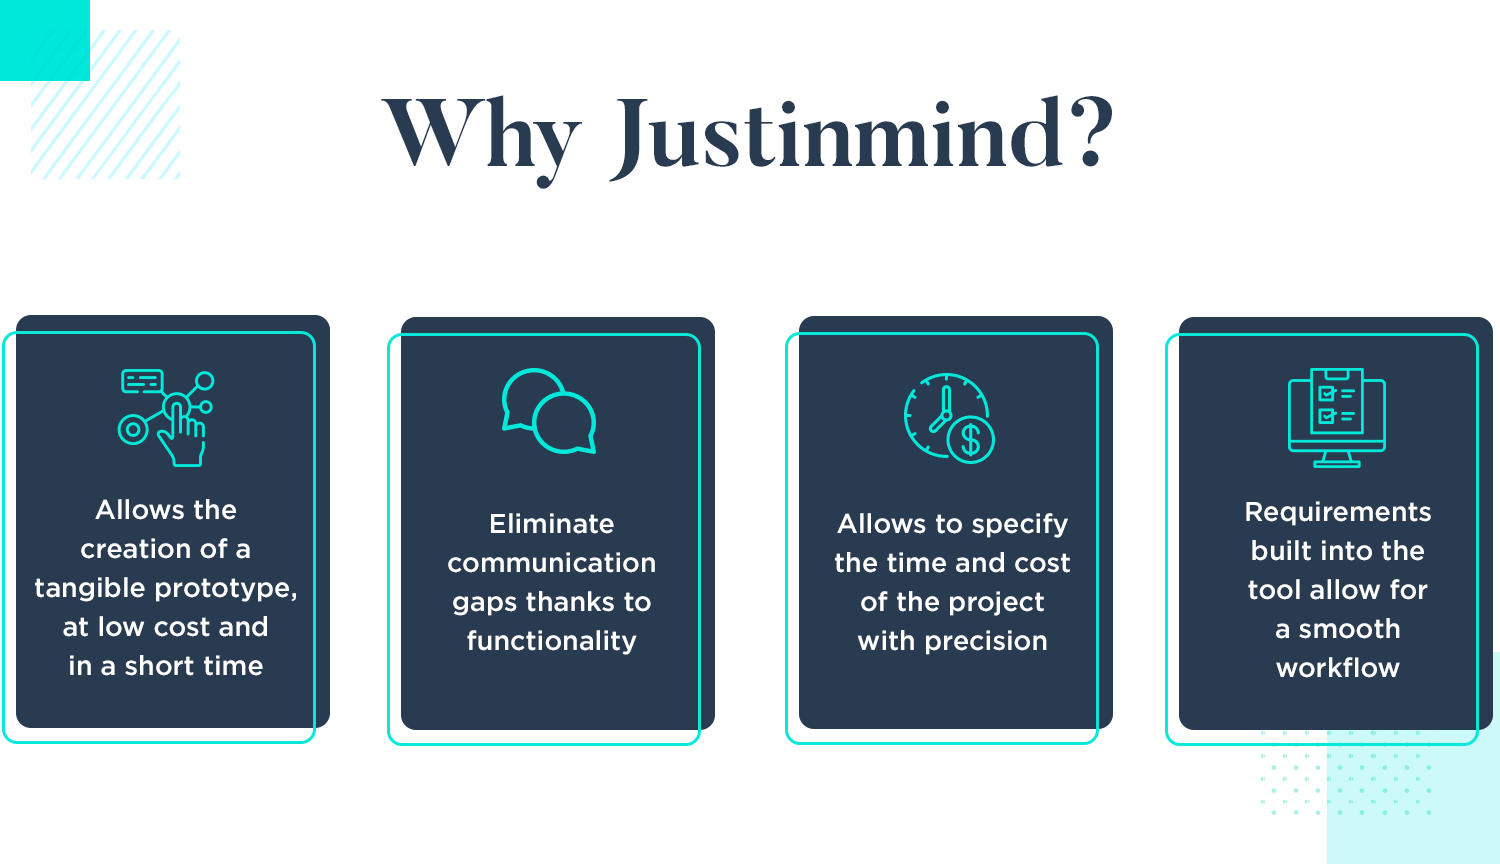 why virtina uses and trusts justinmind